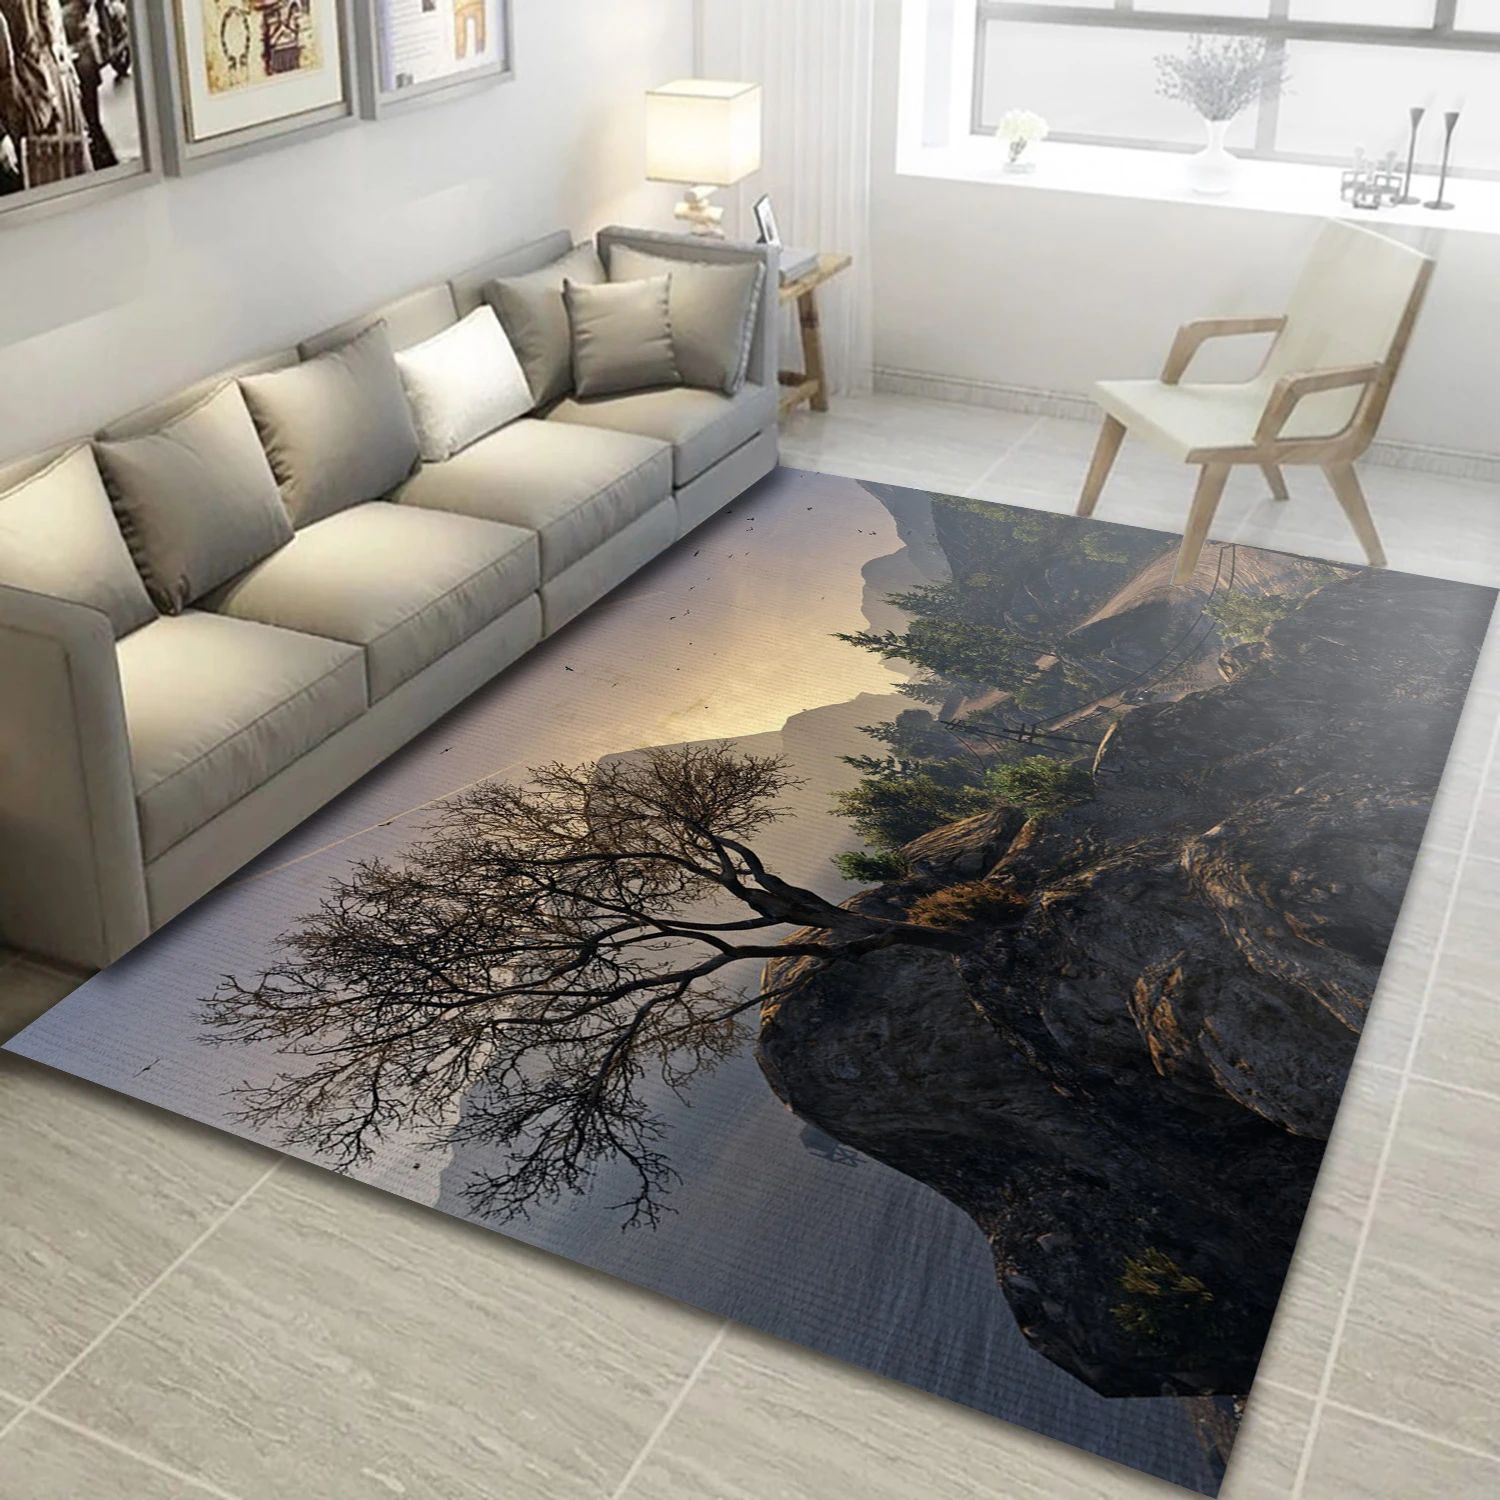 Grand Theft Auto V Gaming Area Rug, Living Room Rug - Home Decor Floor Decor - Indoor Outdoor Rugs